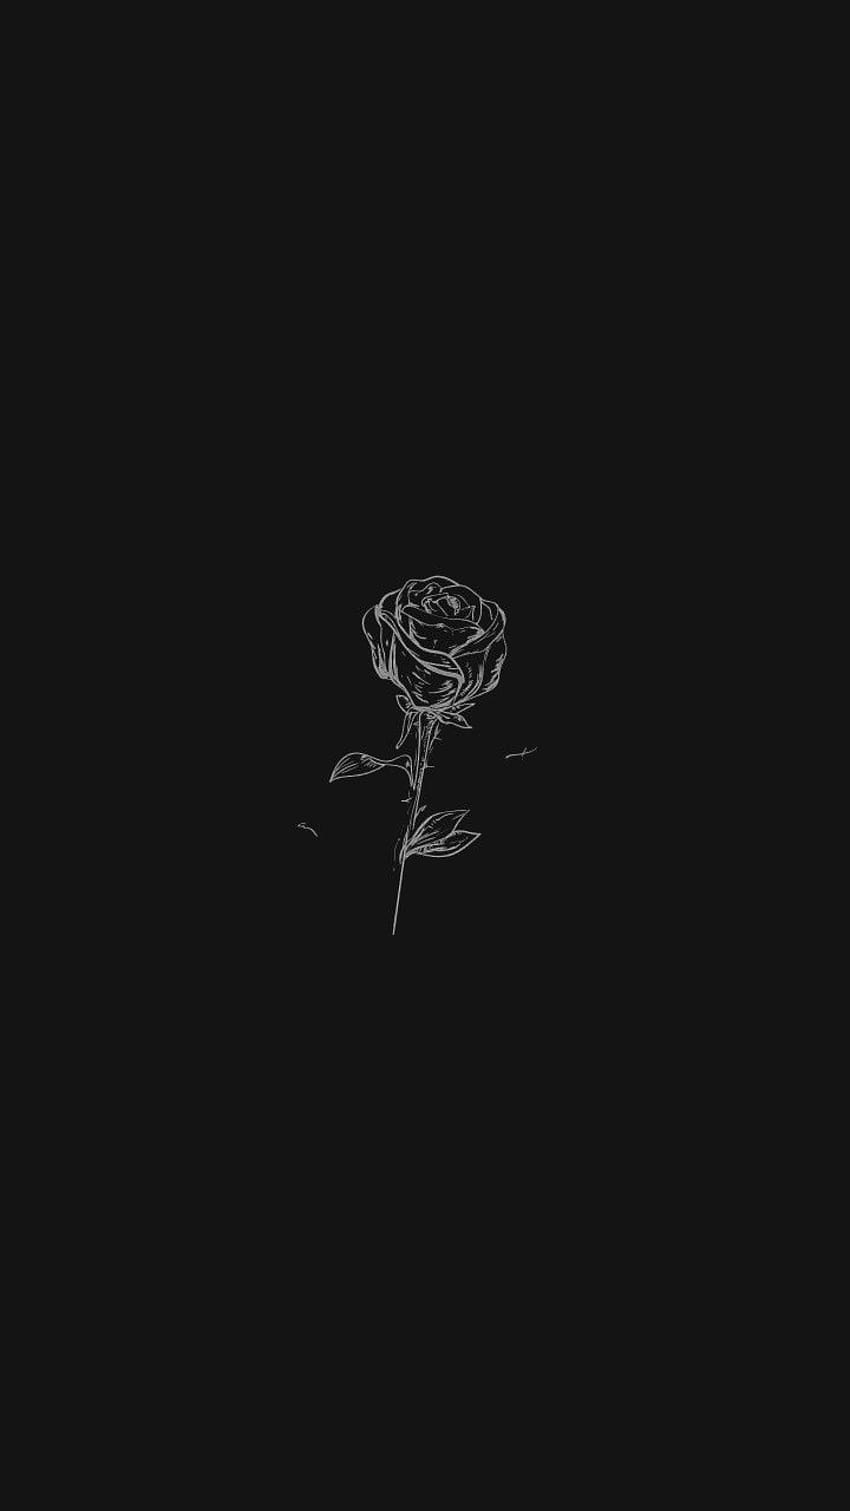 A black and white image of the rose - Black and white